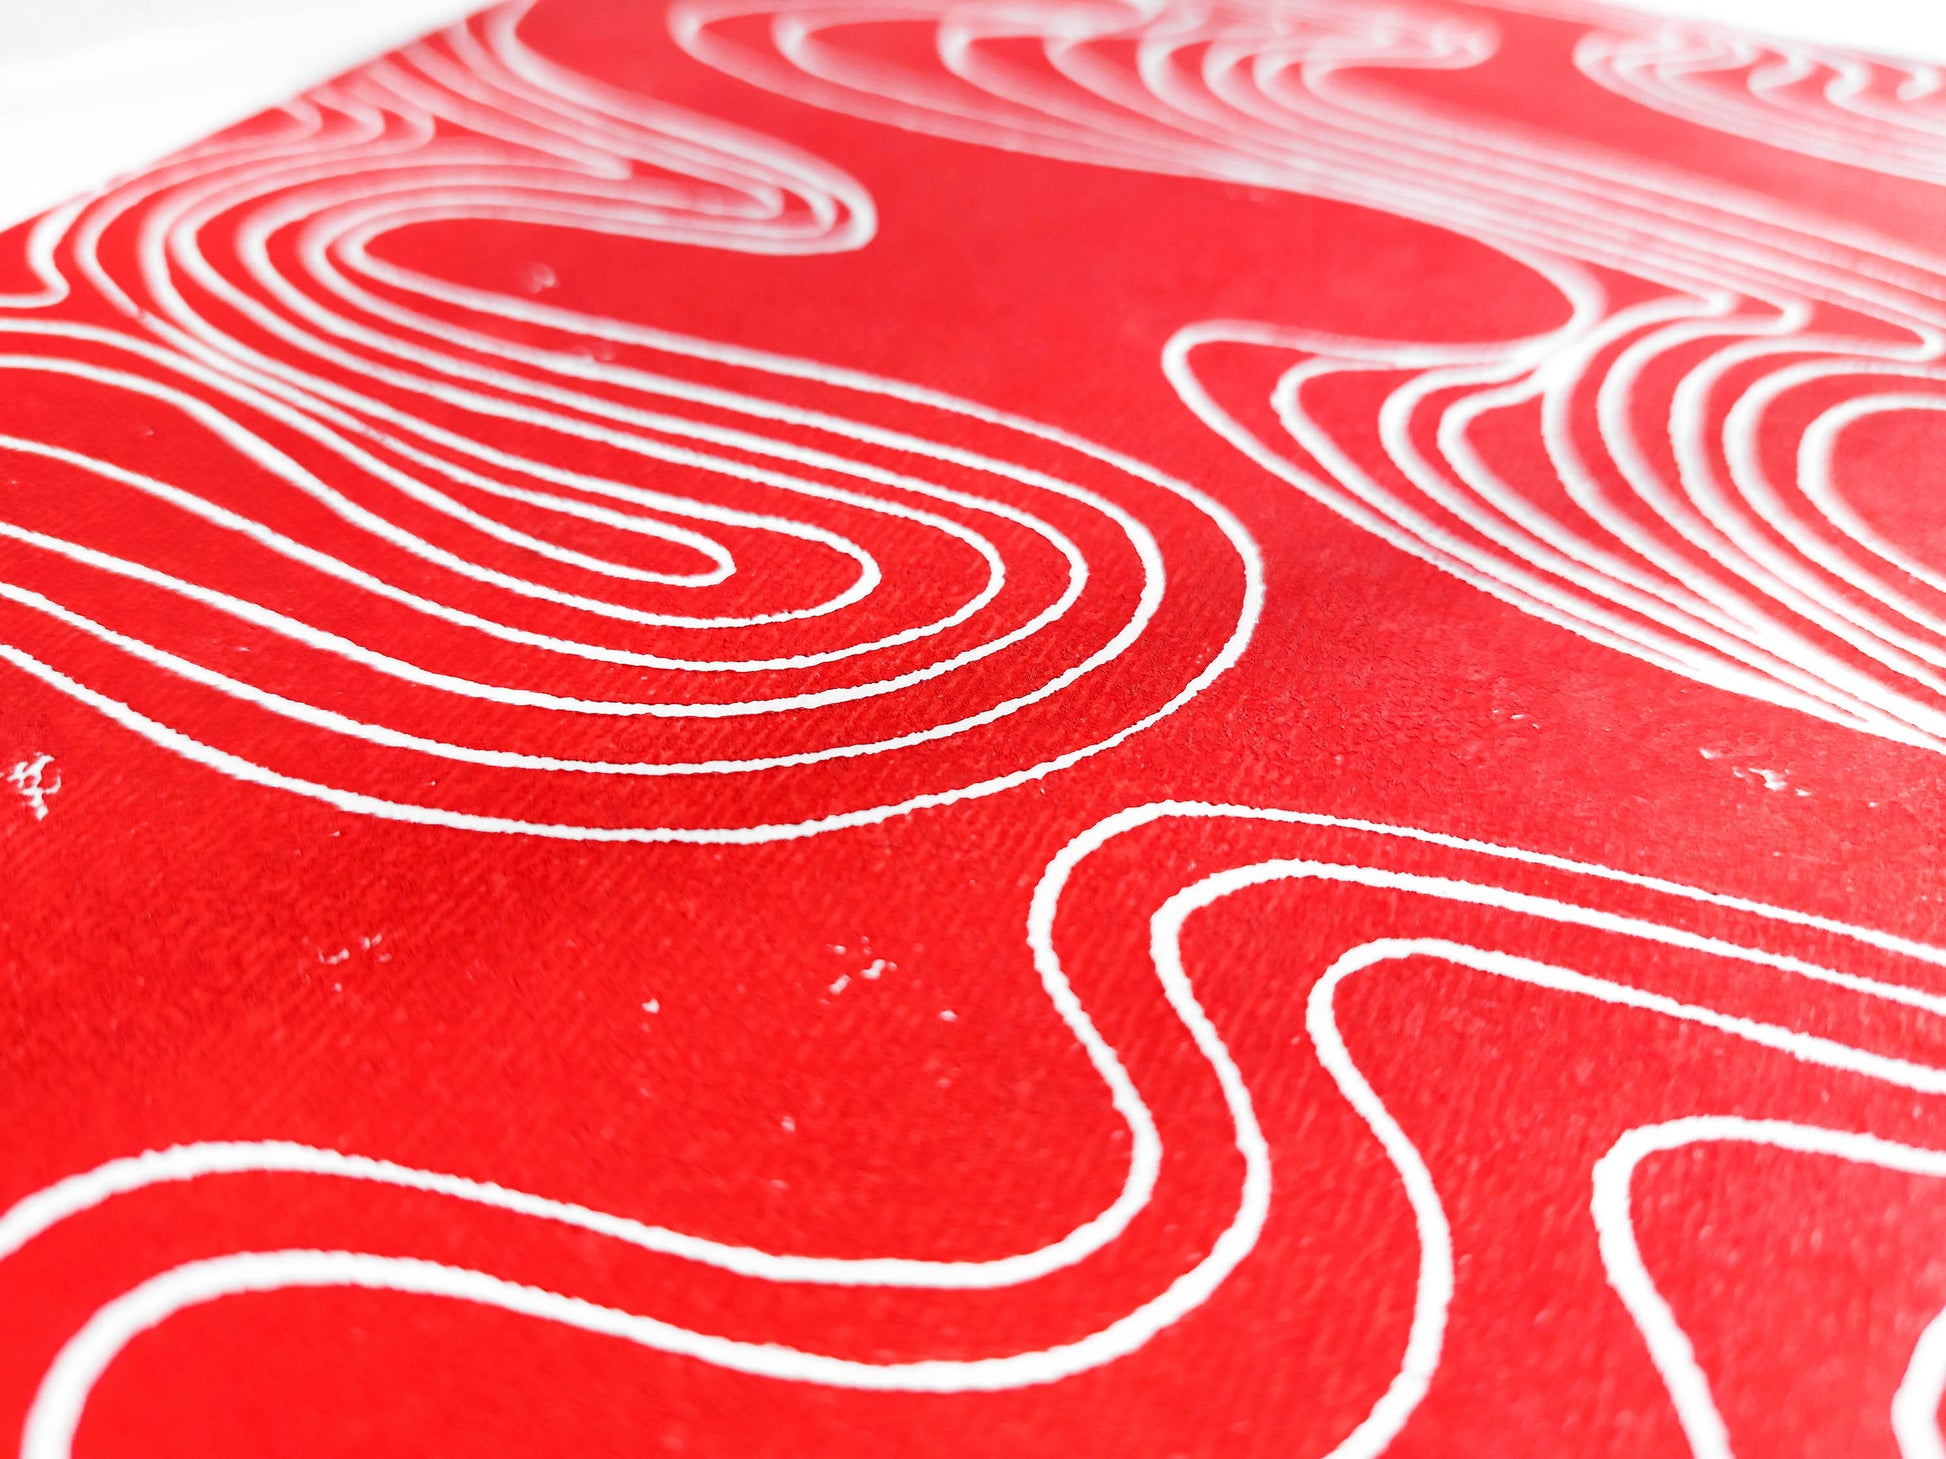 Details relief Red abstract japanese clouds Linocut print / printmaking / lino print / linogravure